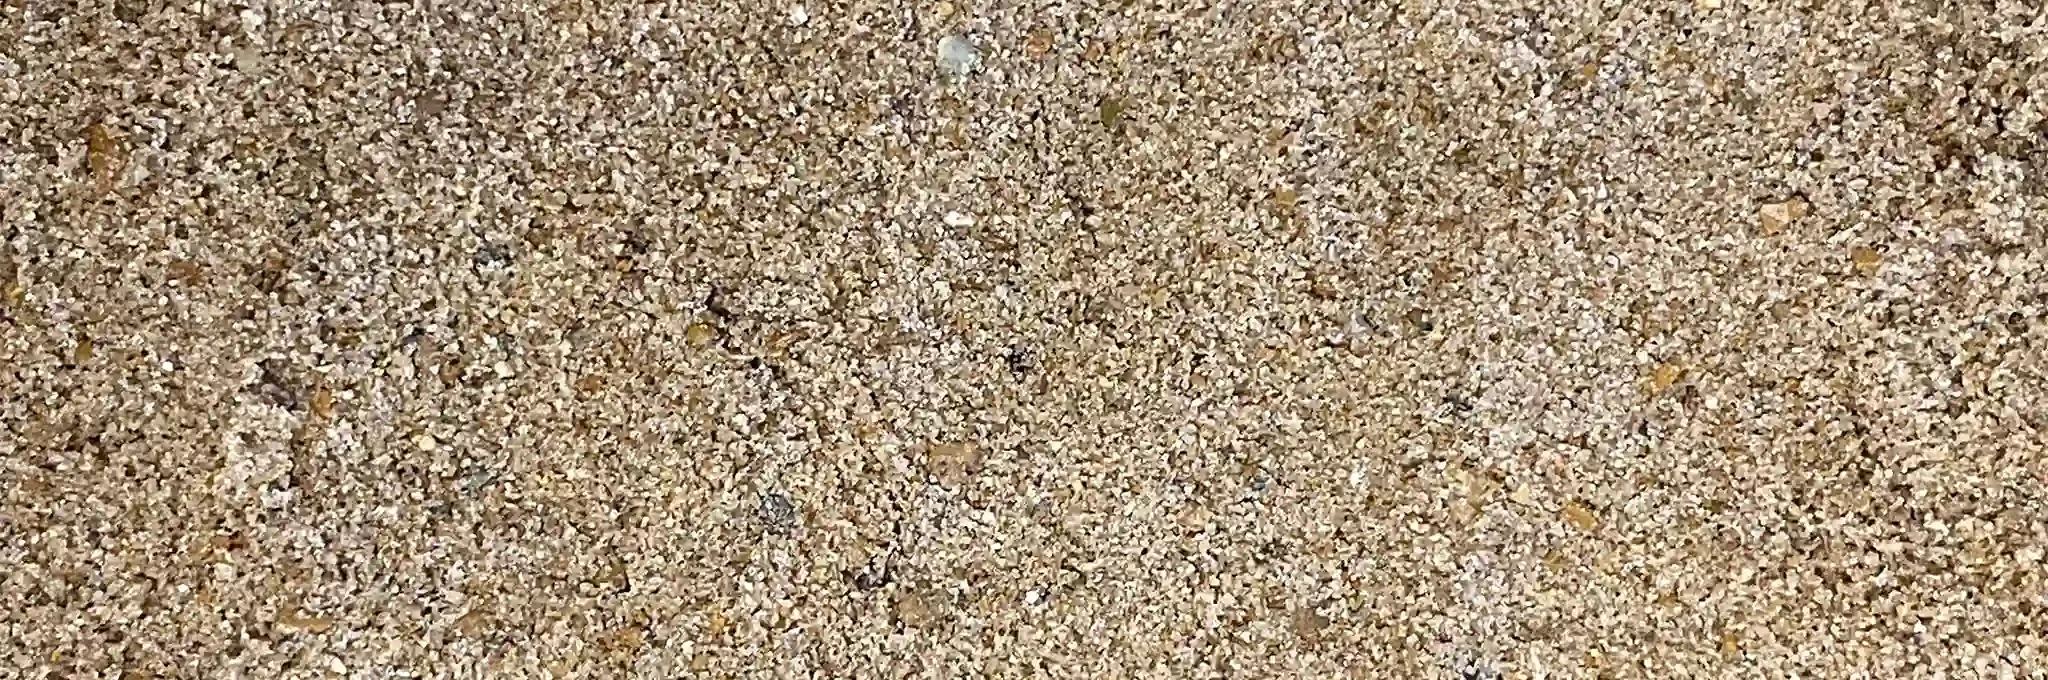 A close-up view of Greens Construction Sand, Tee Sand, and Drainage Sand.